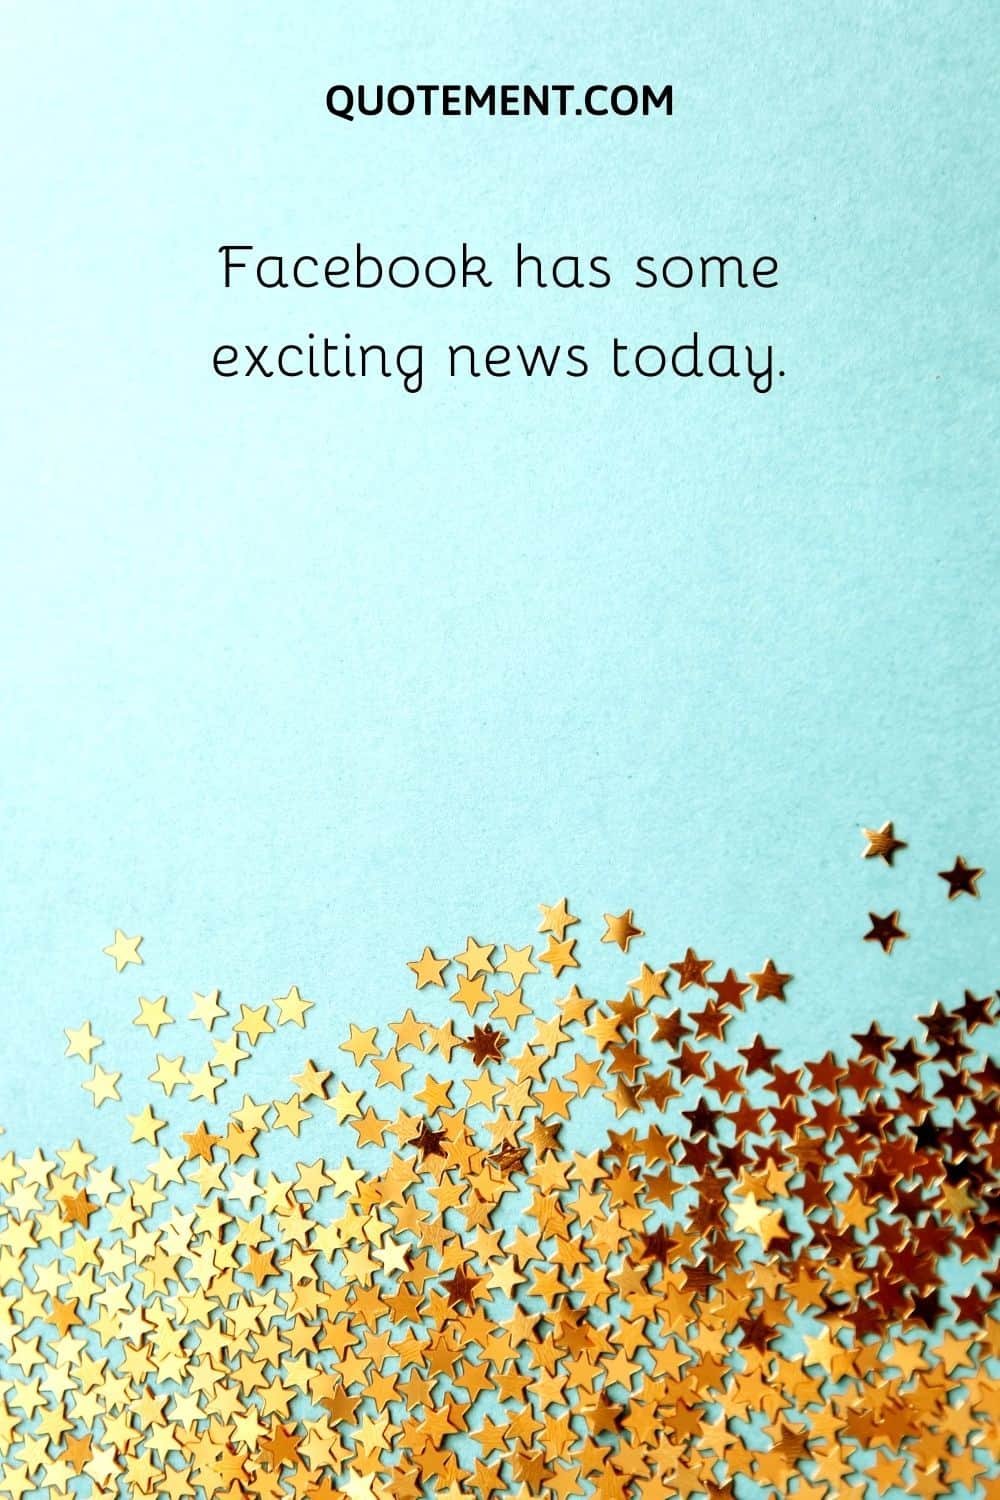 Facebook has some exciting news today.